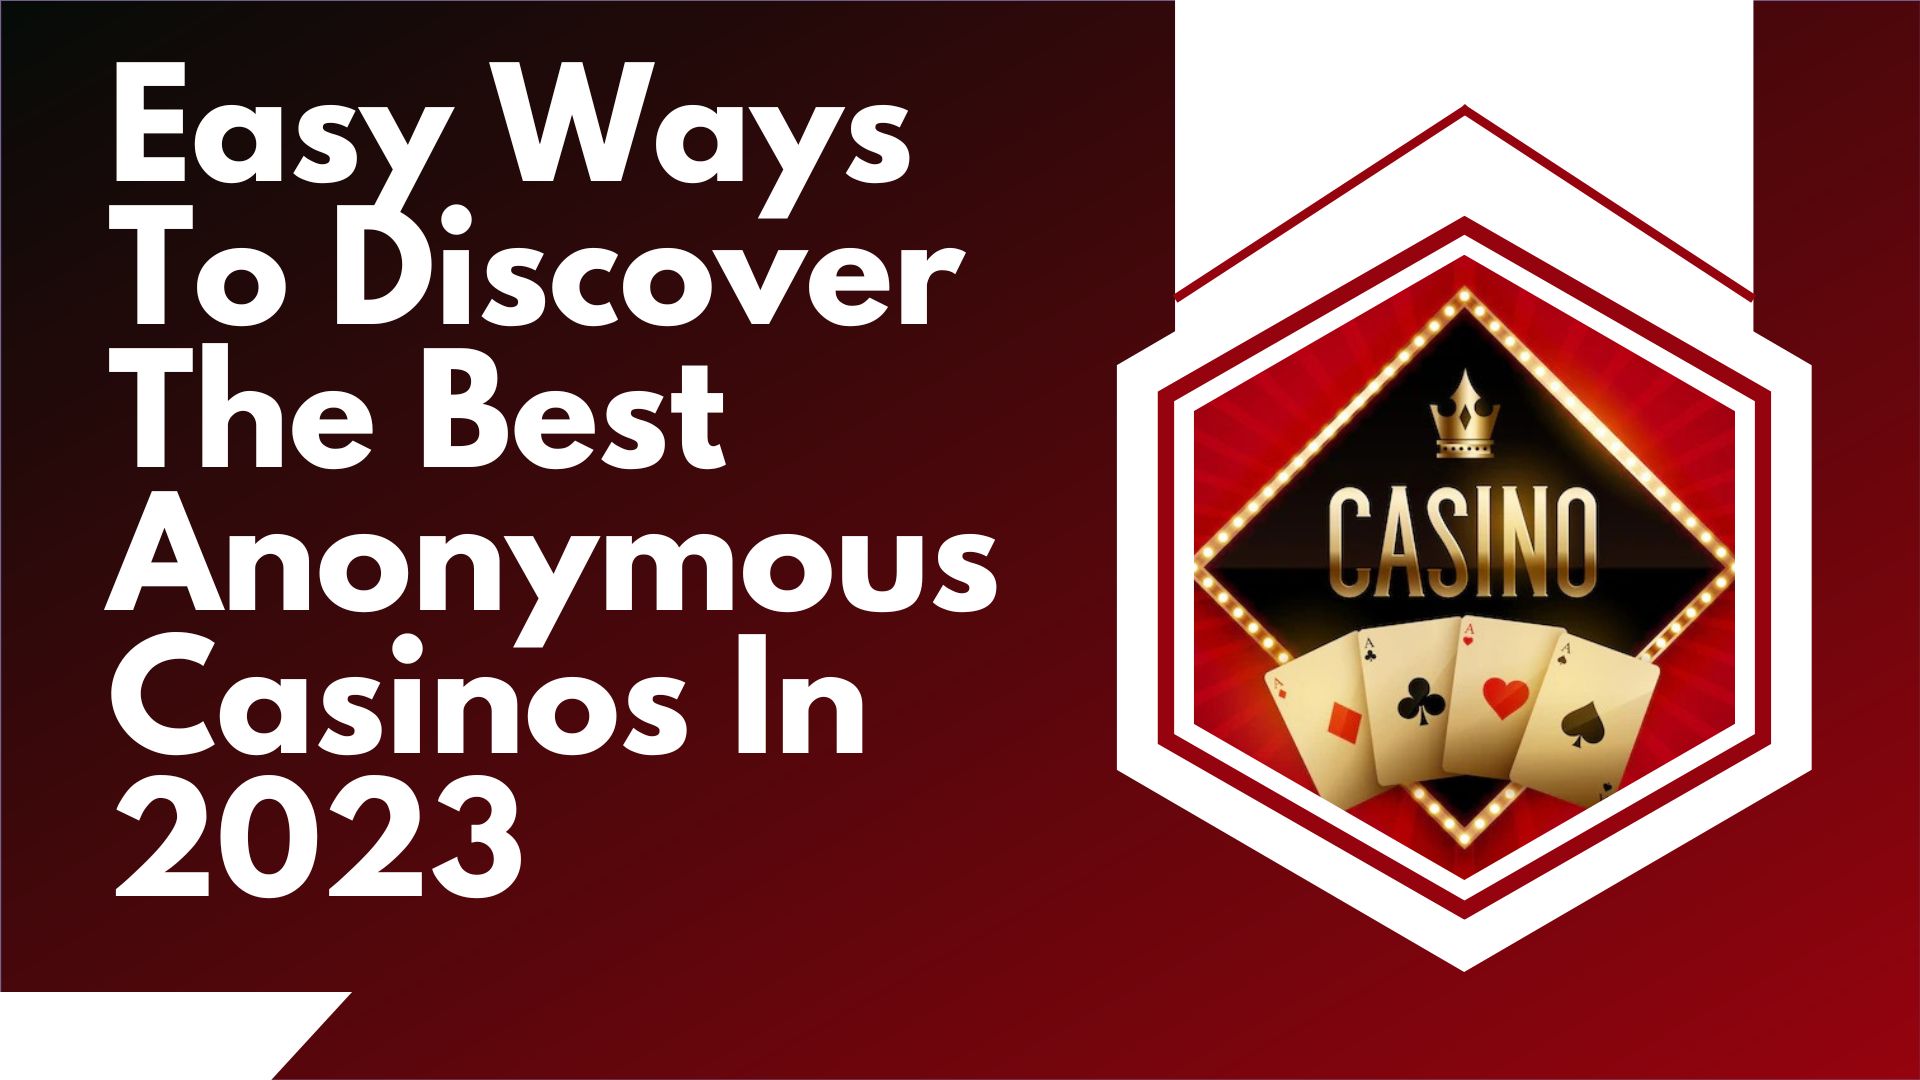 Easy Ways To Discover The Best Anonymous Casinos In 2023